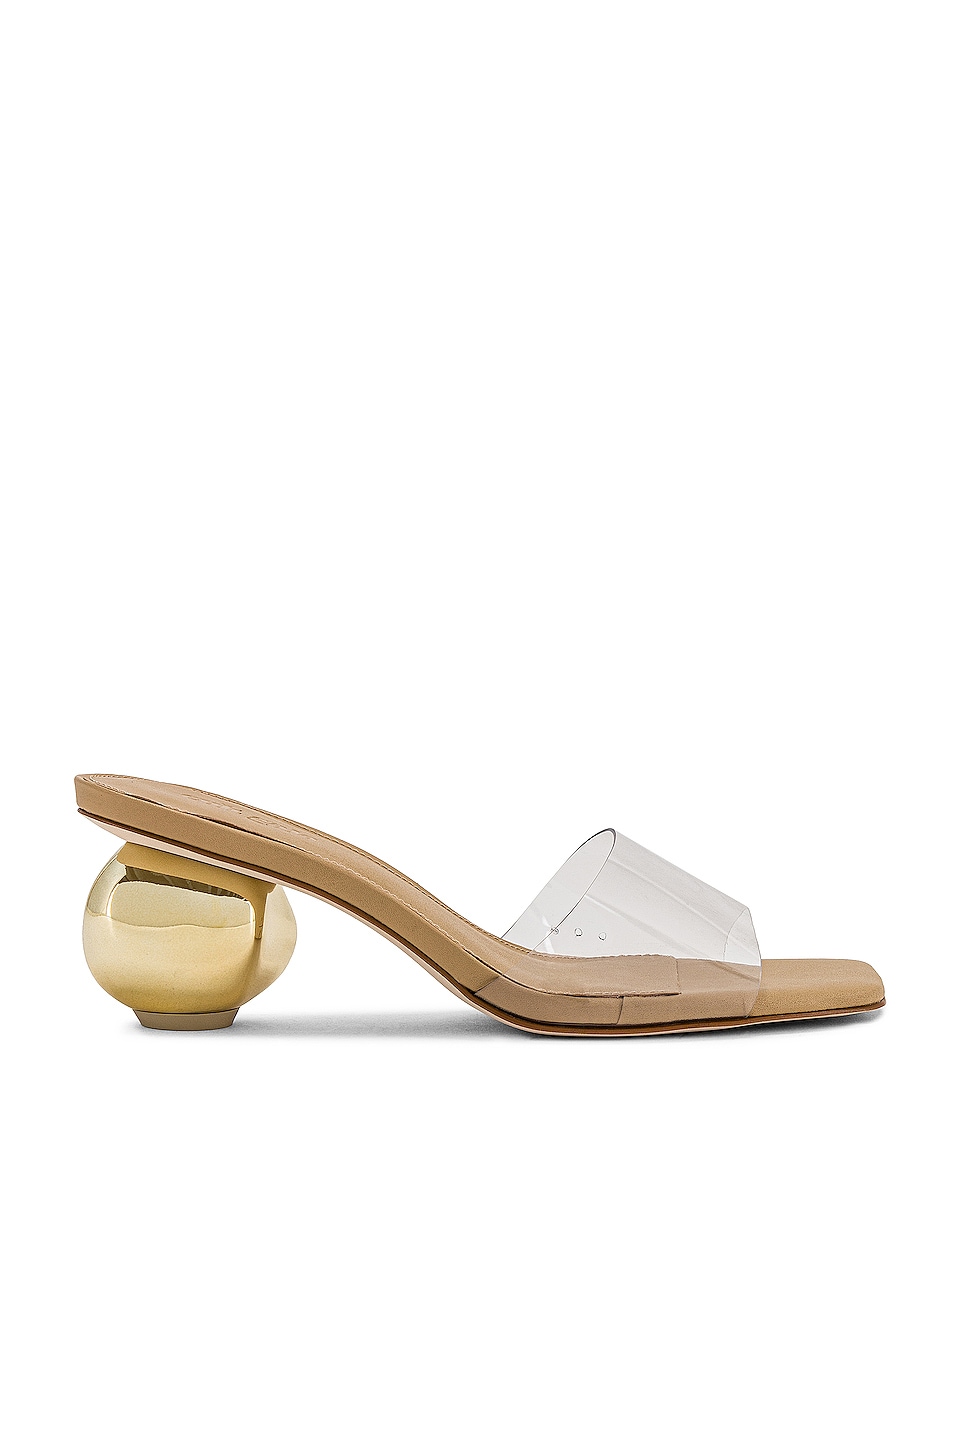 NUDE MULES HEELS, Tyra Mule 
Cult Gaia: There are so many designer and high-street fashion brands with new heeled mules designs popping up all the time, but you actually don't have to go anywhere searching, because I have curated for you the hottest designs for this summer for all budgets.